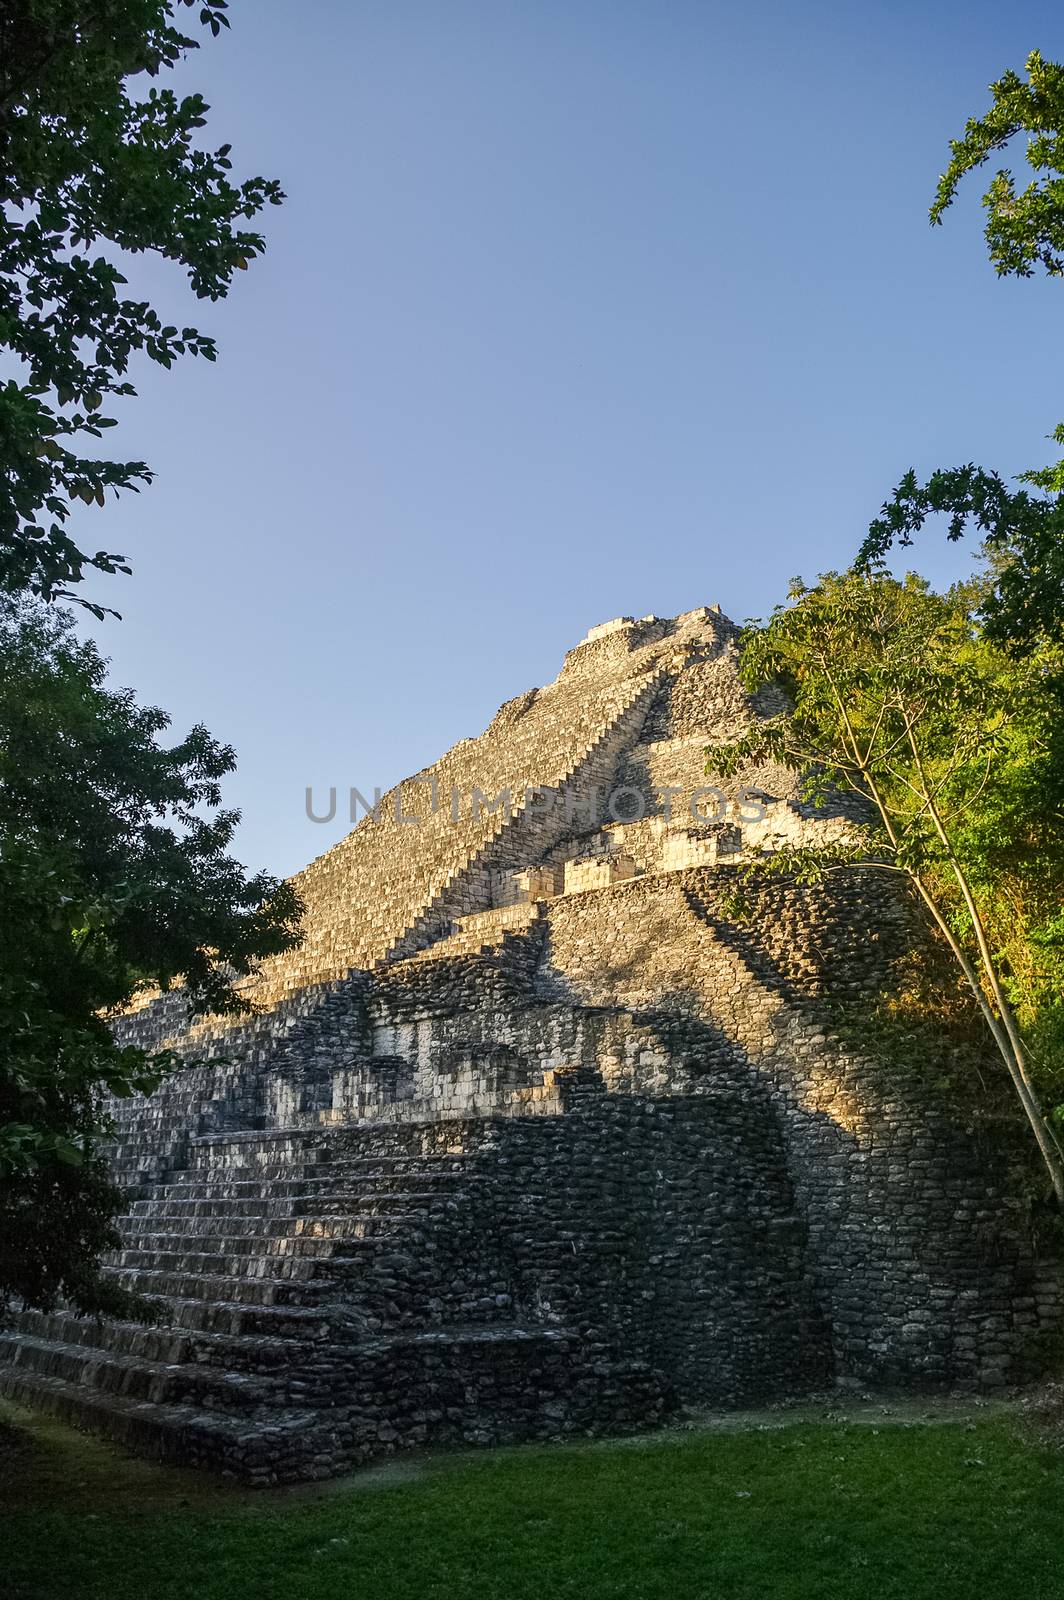 Ruins of pyramid in the ancient Mayan city of Becan, Mexico